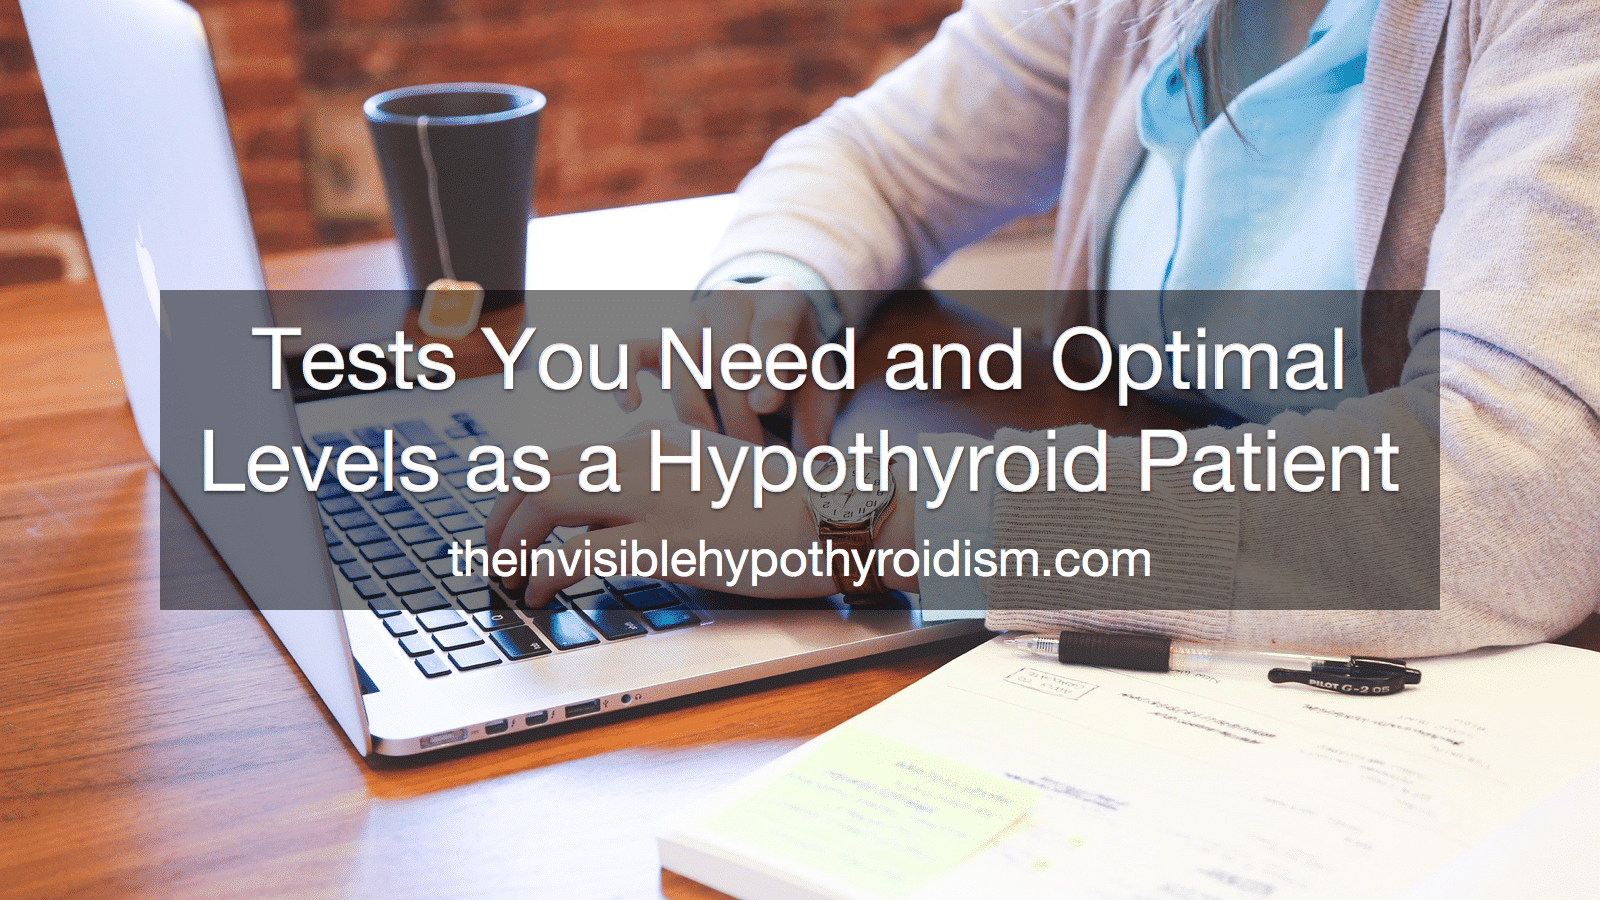 Tests You Need and Optimal Levels as a Hypothyroid Patient